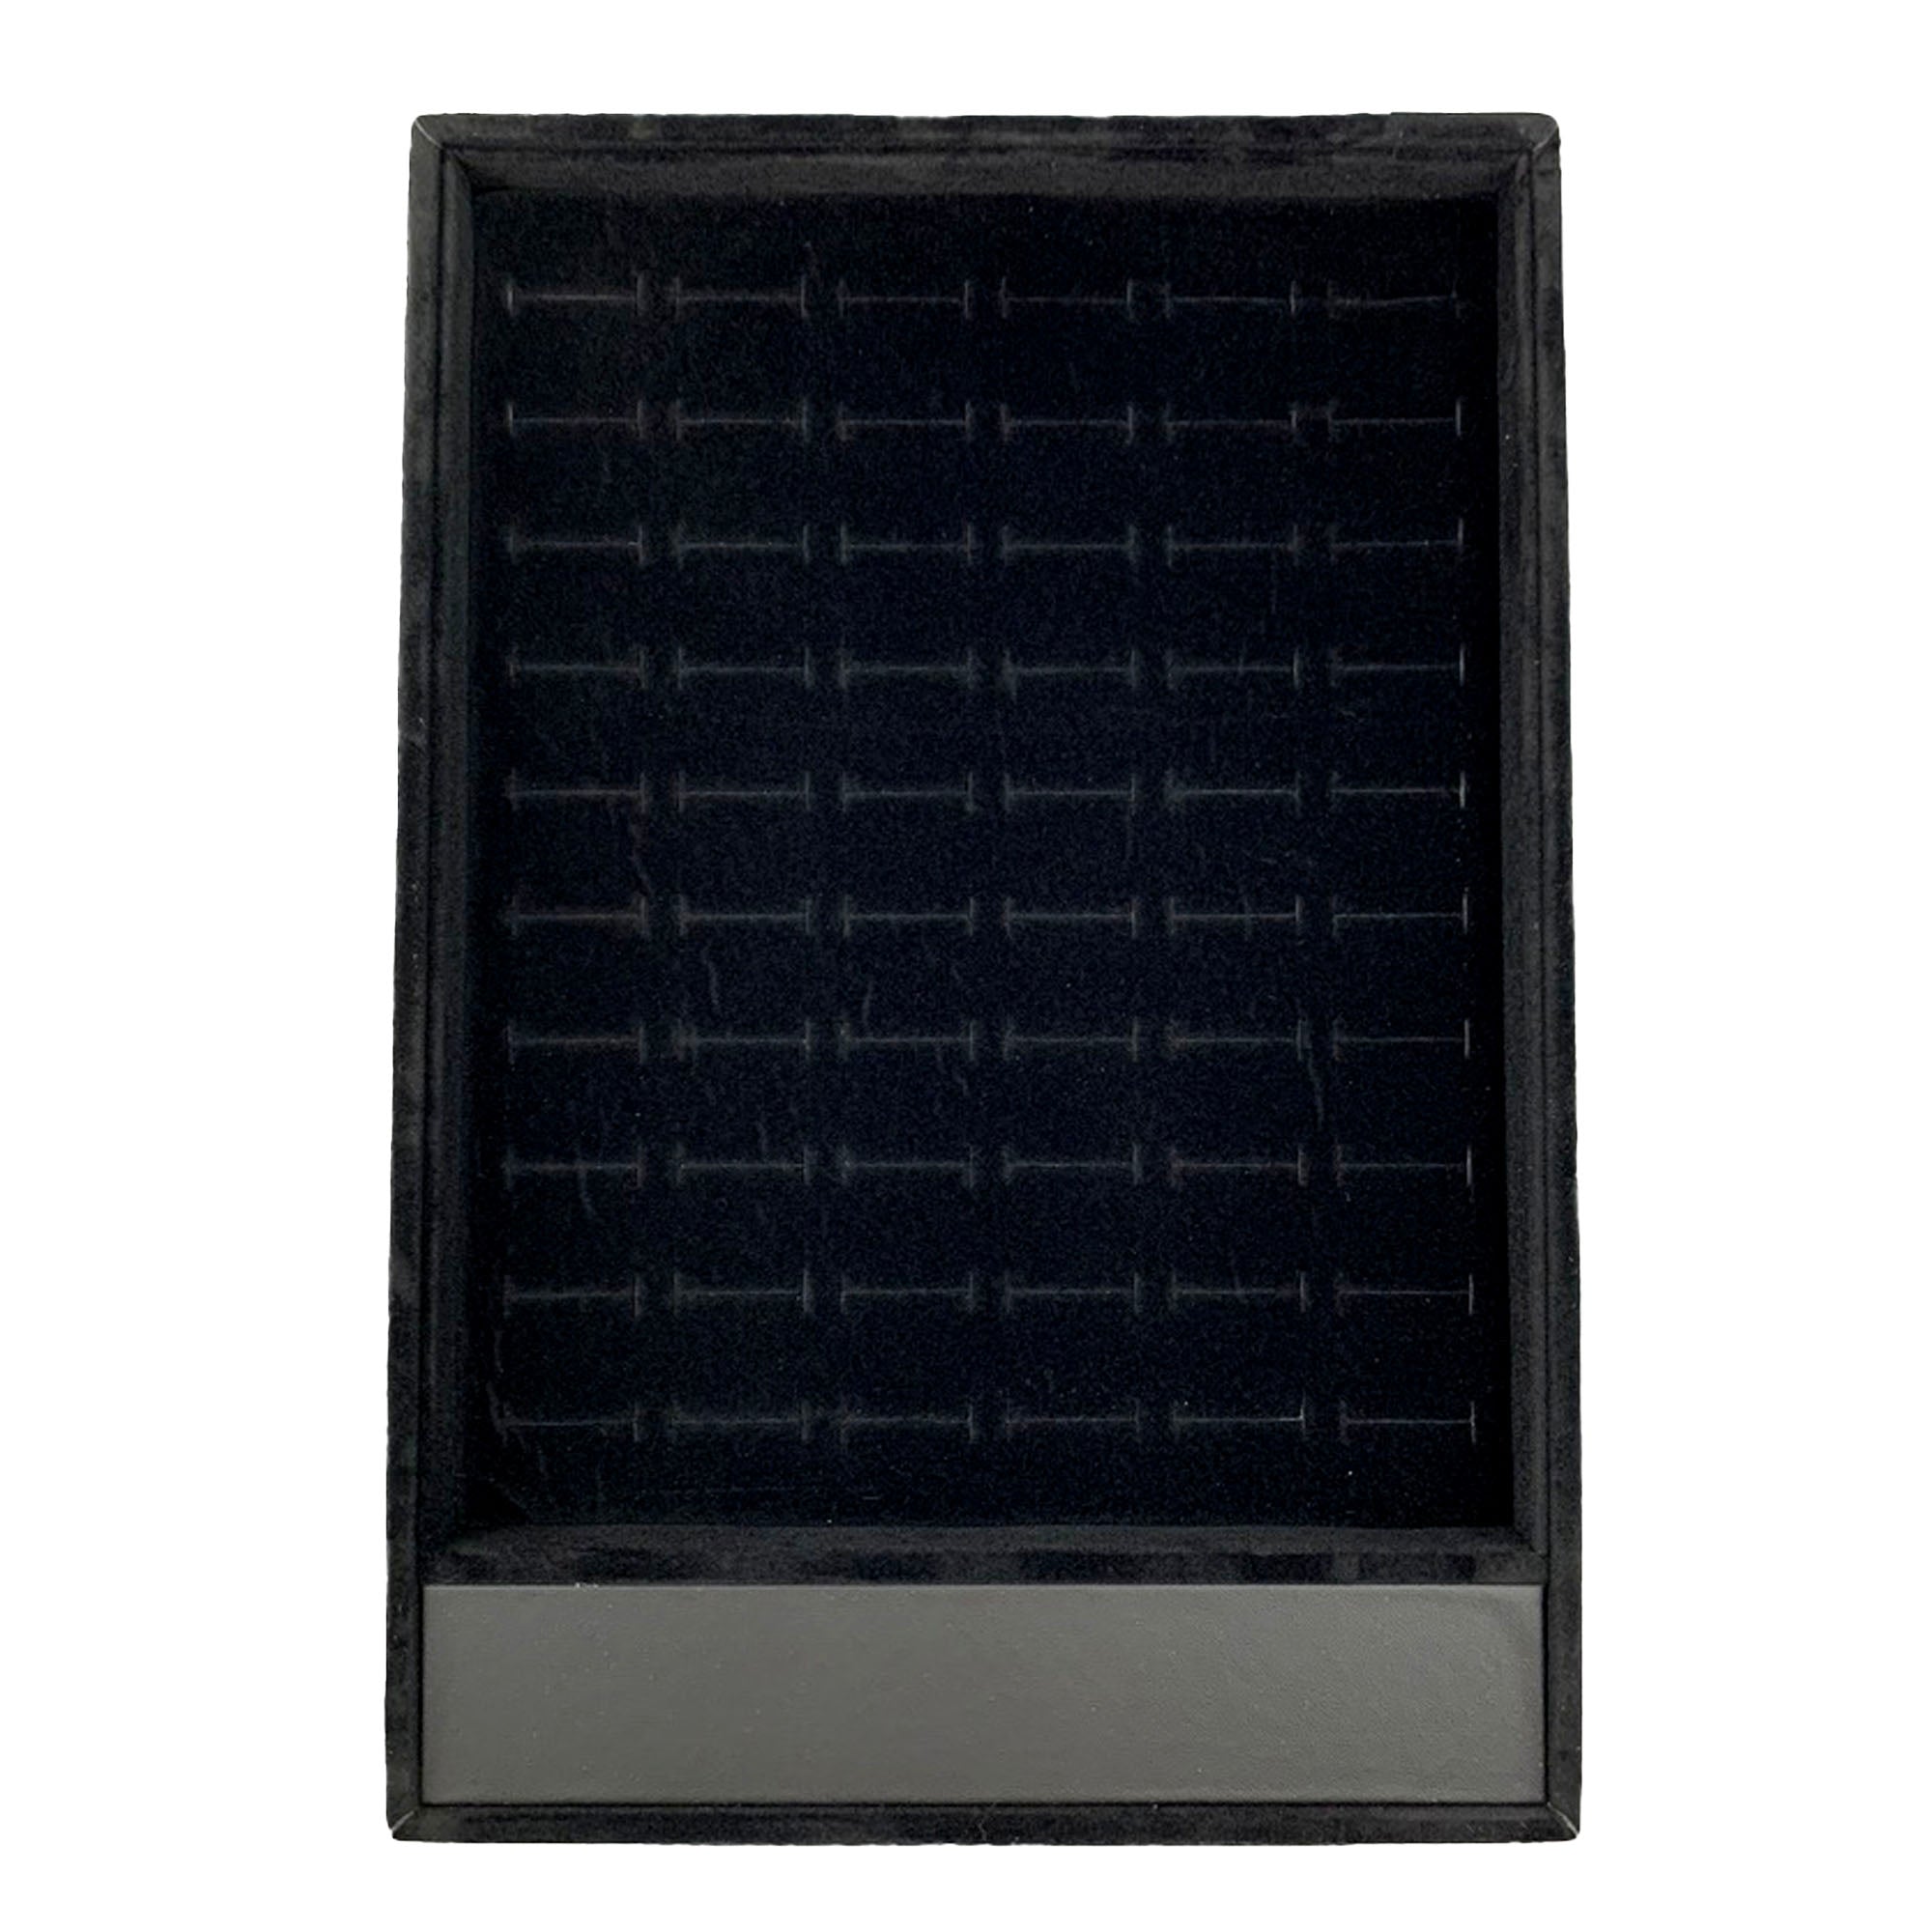 60 Slotted Black RING Display Tray / DSP0001